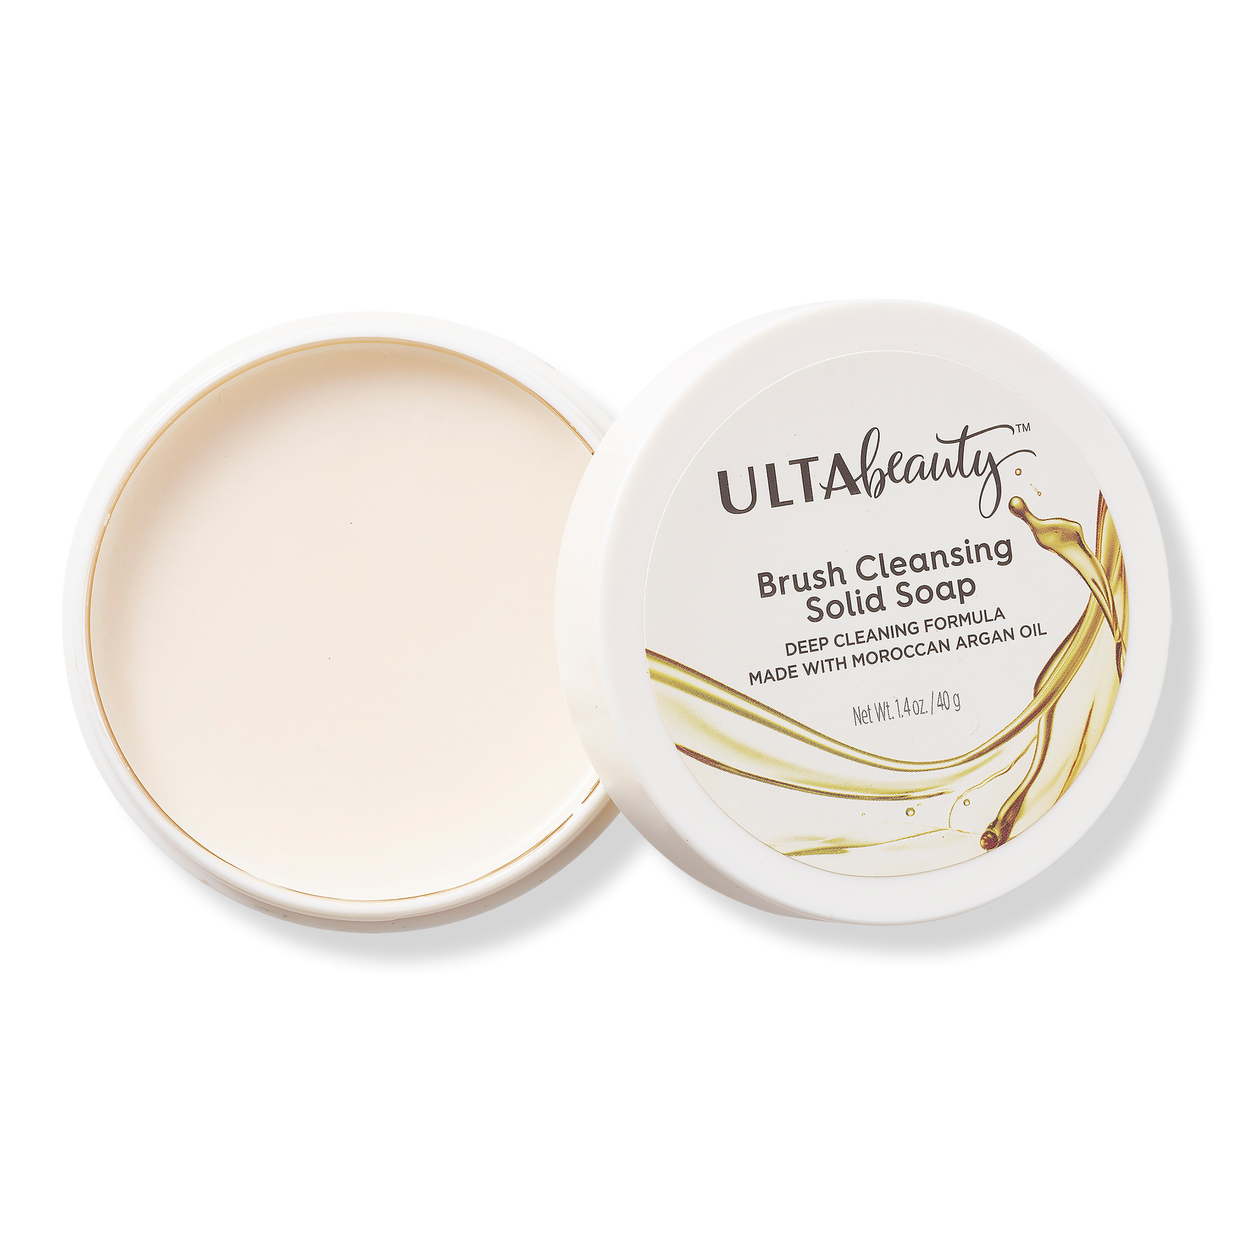 Brush Cleansing Solid Soap - ULTA Beauty Collection